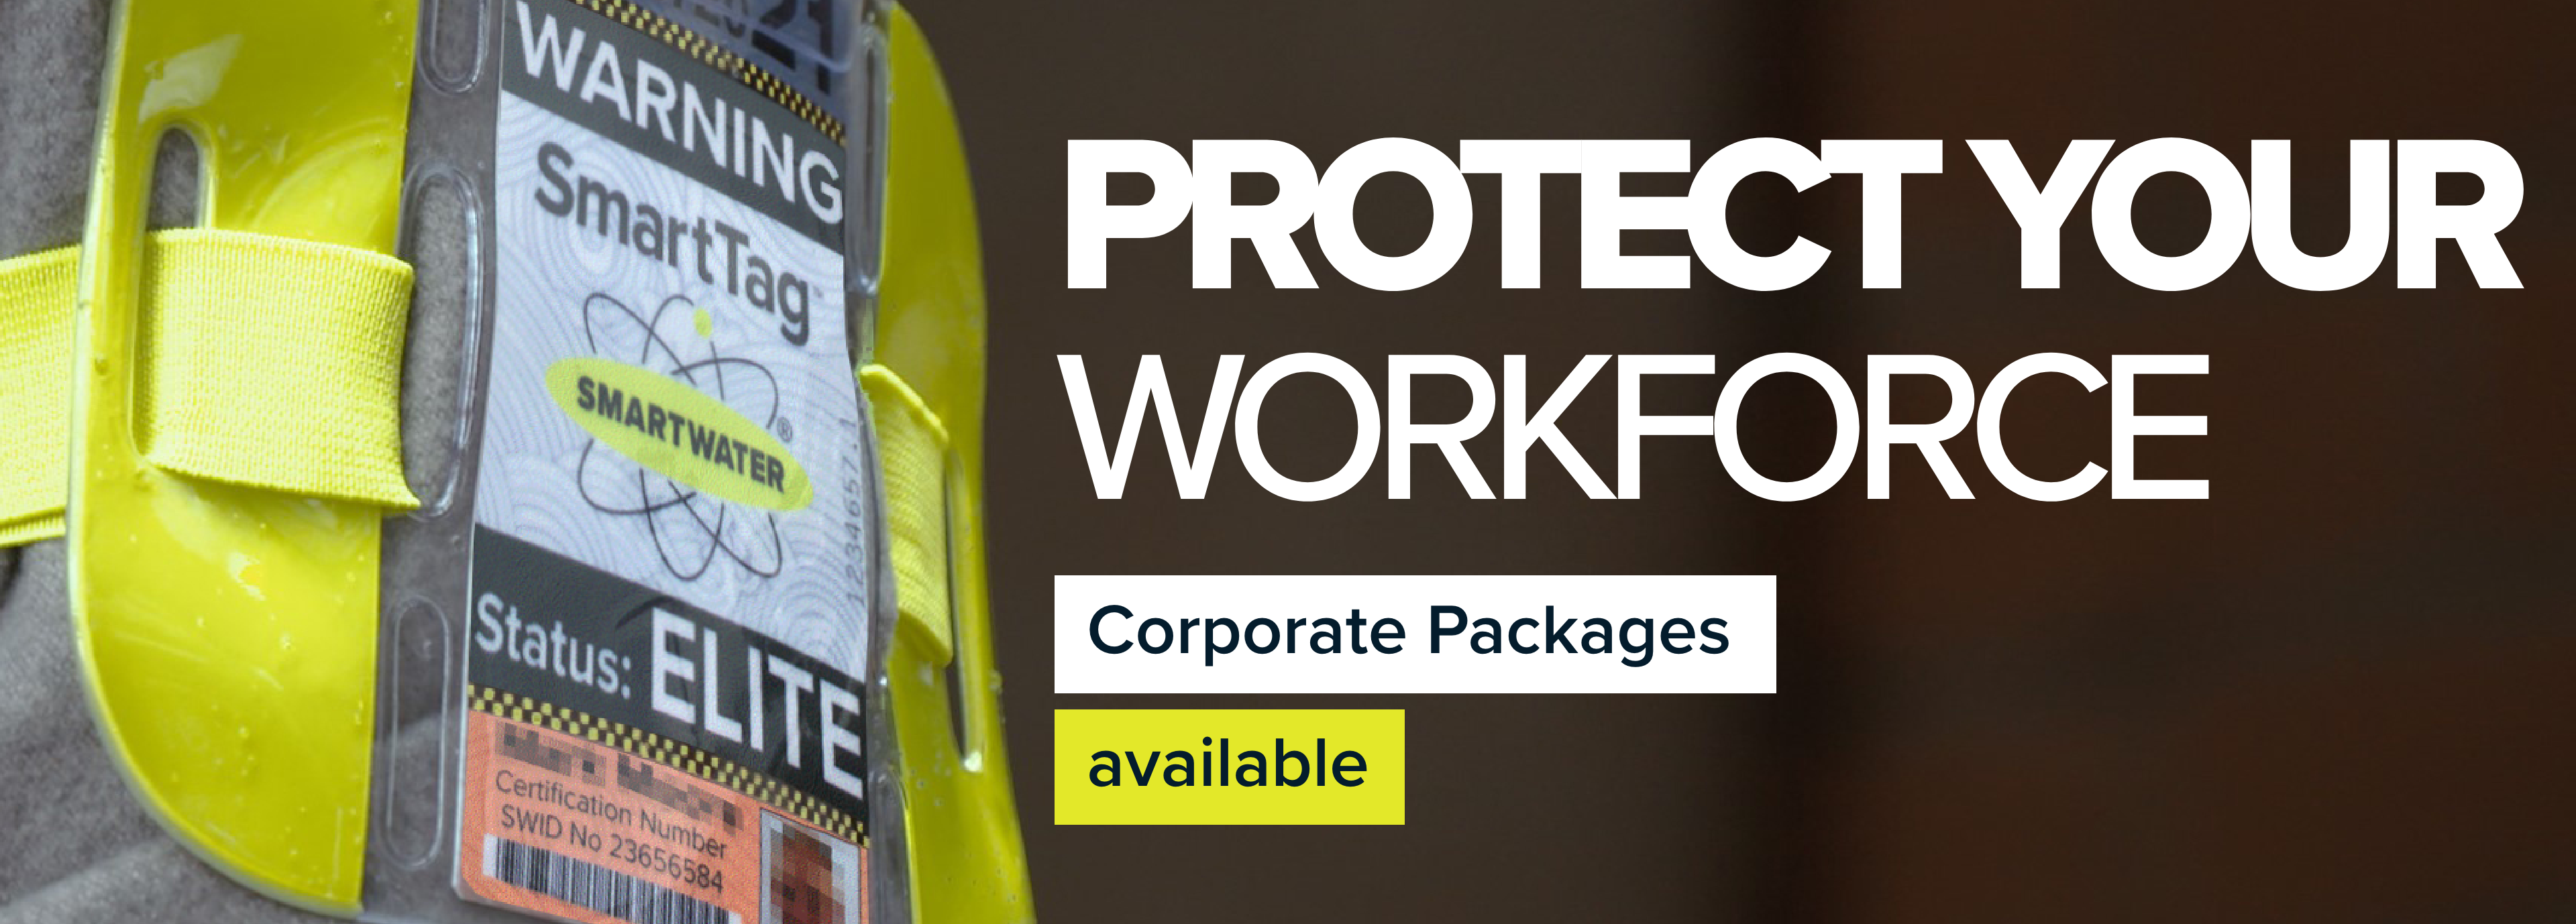 Protect Your Workforce